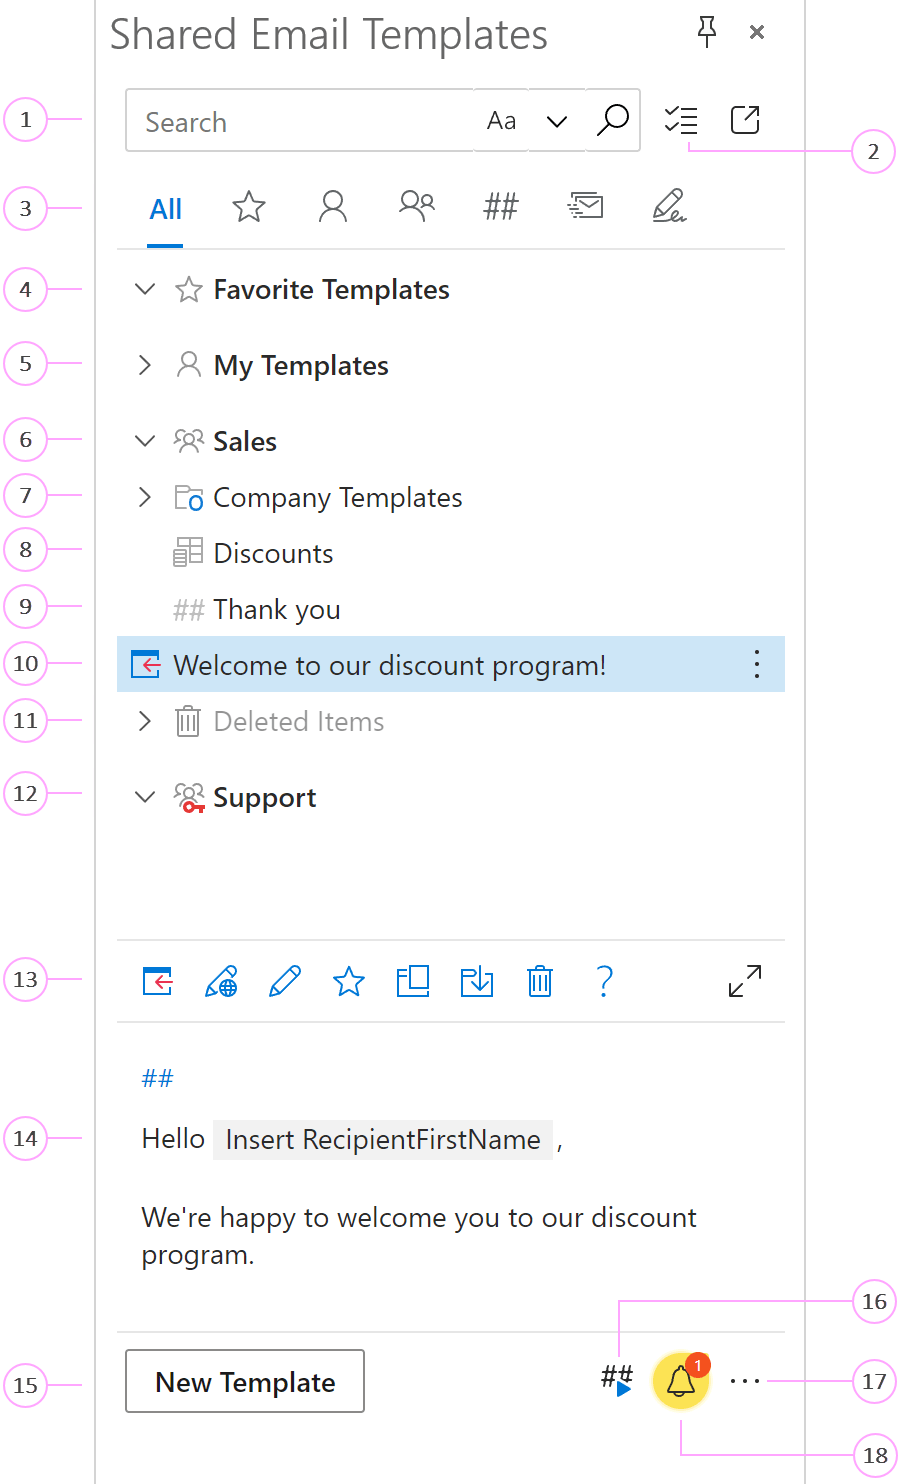 Shared Email Templates in your Outlook